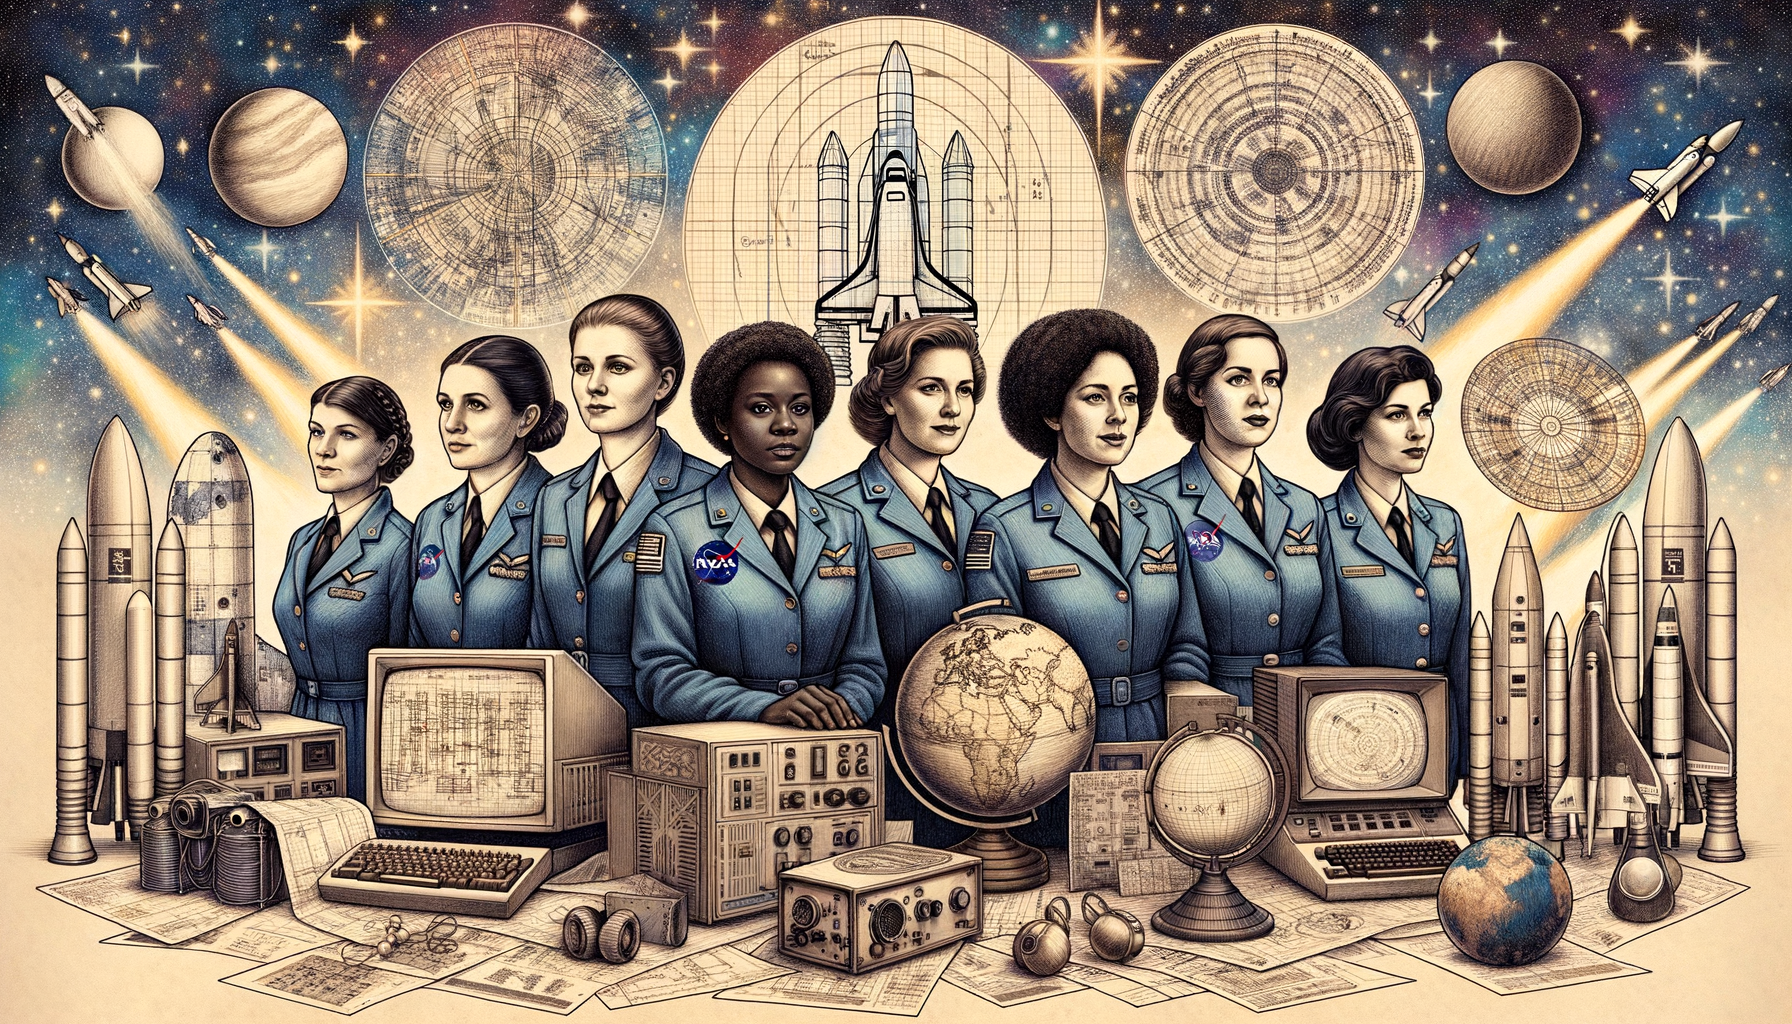 discover how nasa's first six women astronauts revolutionized space exploration and paved the way for future female astronauts.